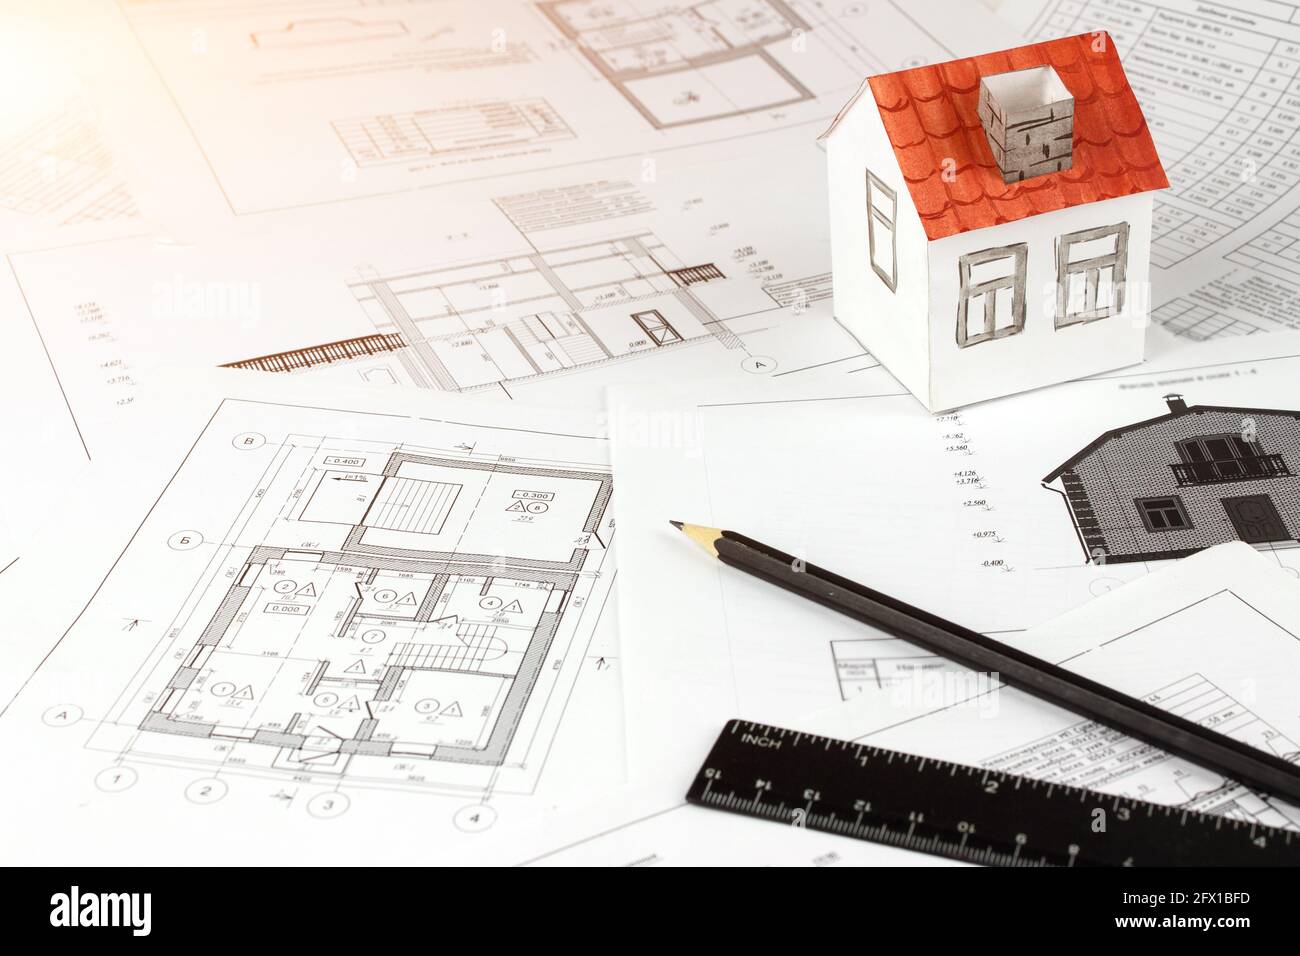 Architectural drawings and house concept. Architect Desk. Engineering blueprint. Construction background. Engineering tools Stock Photo